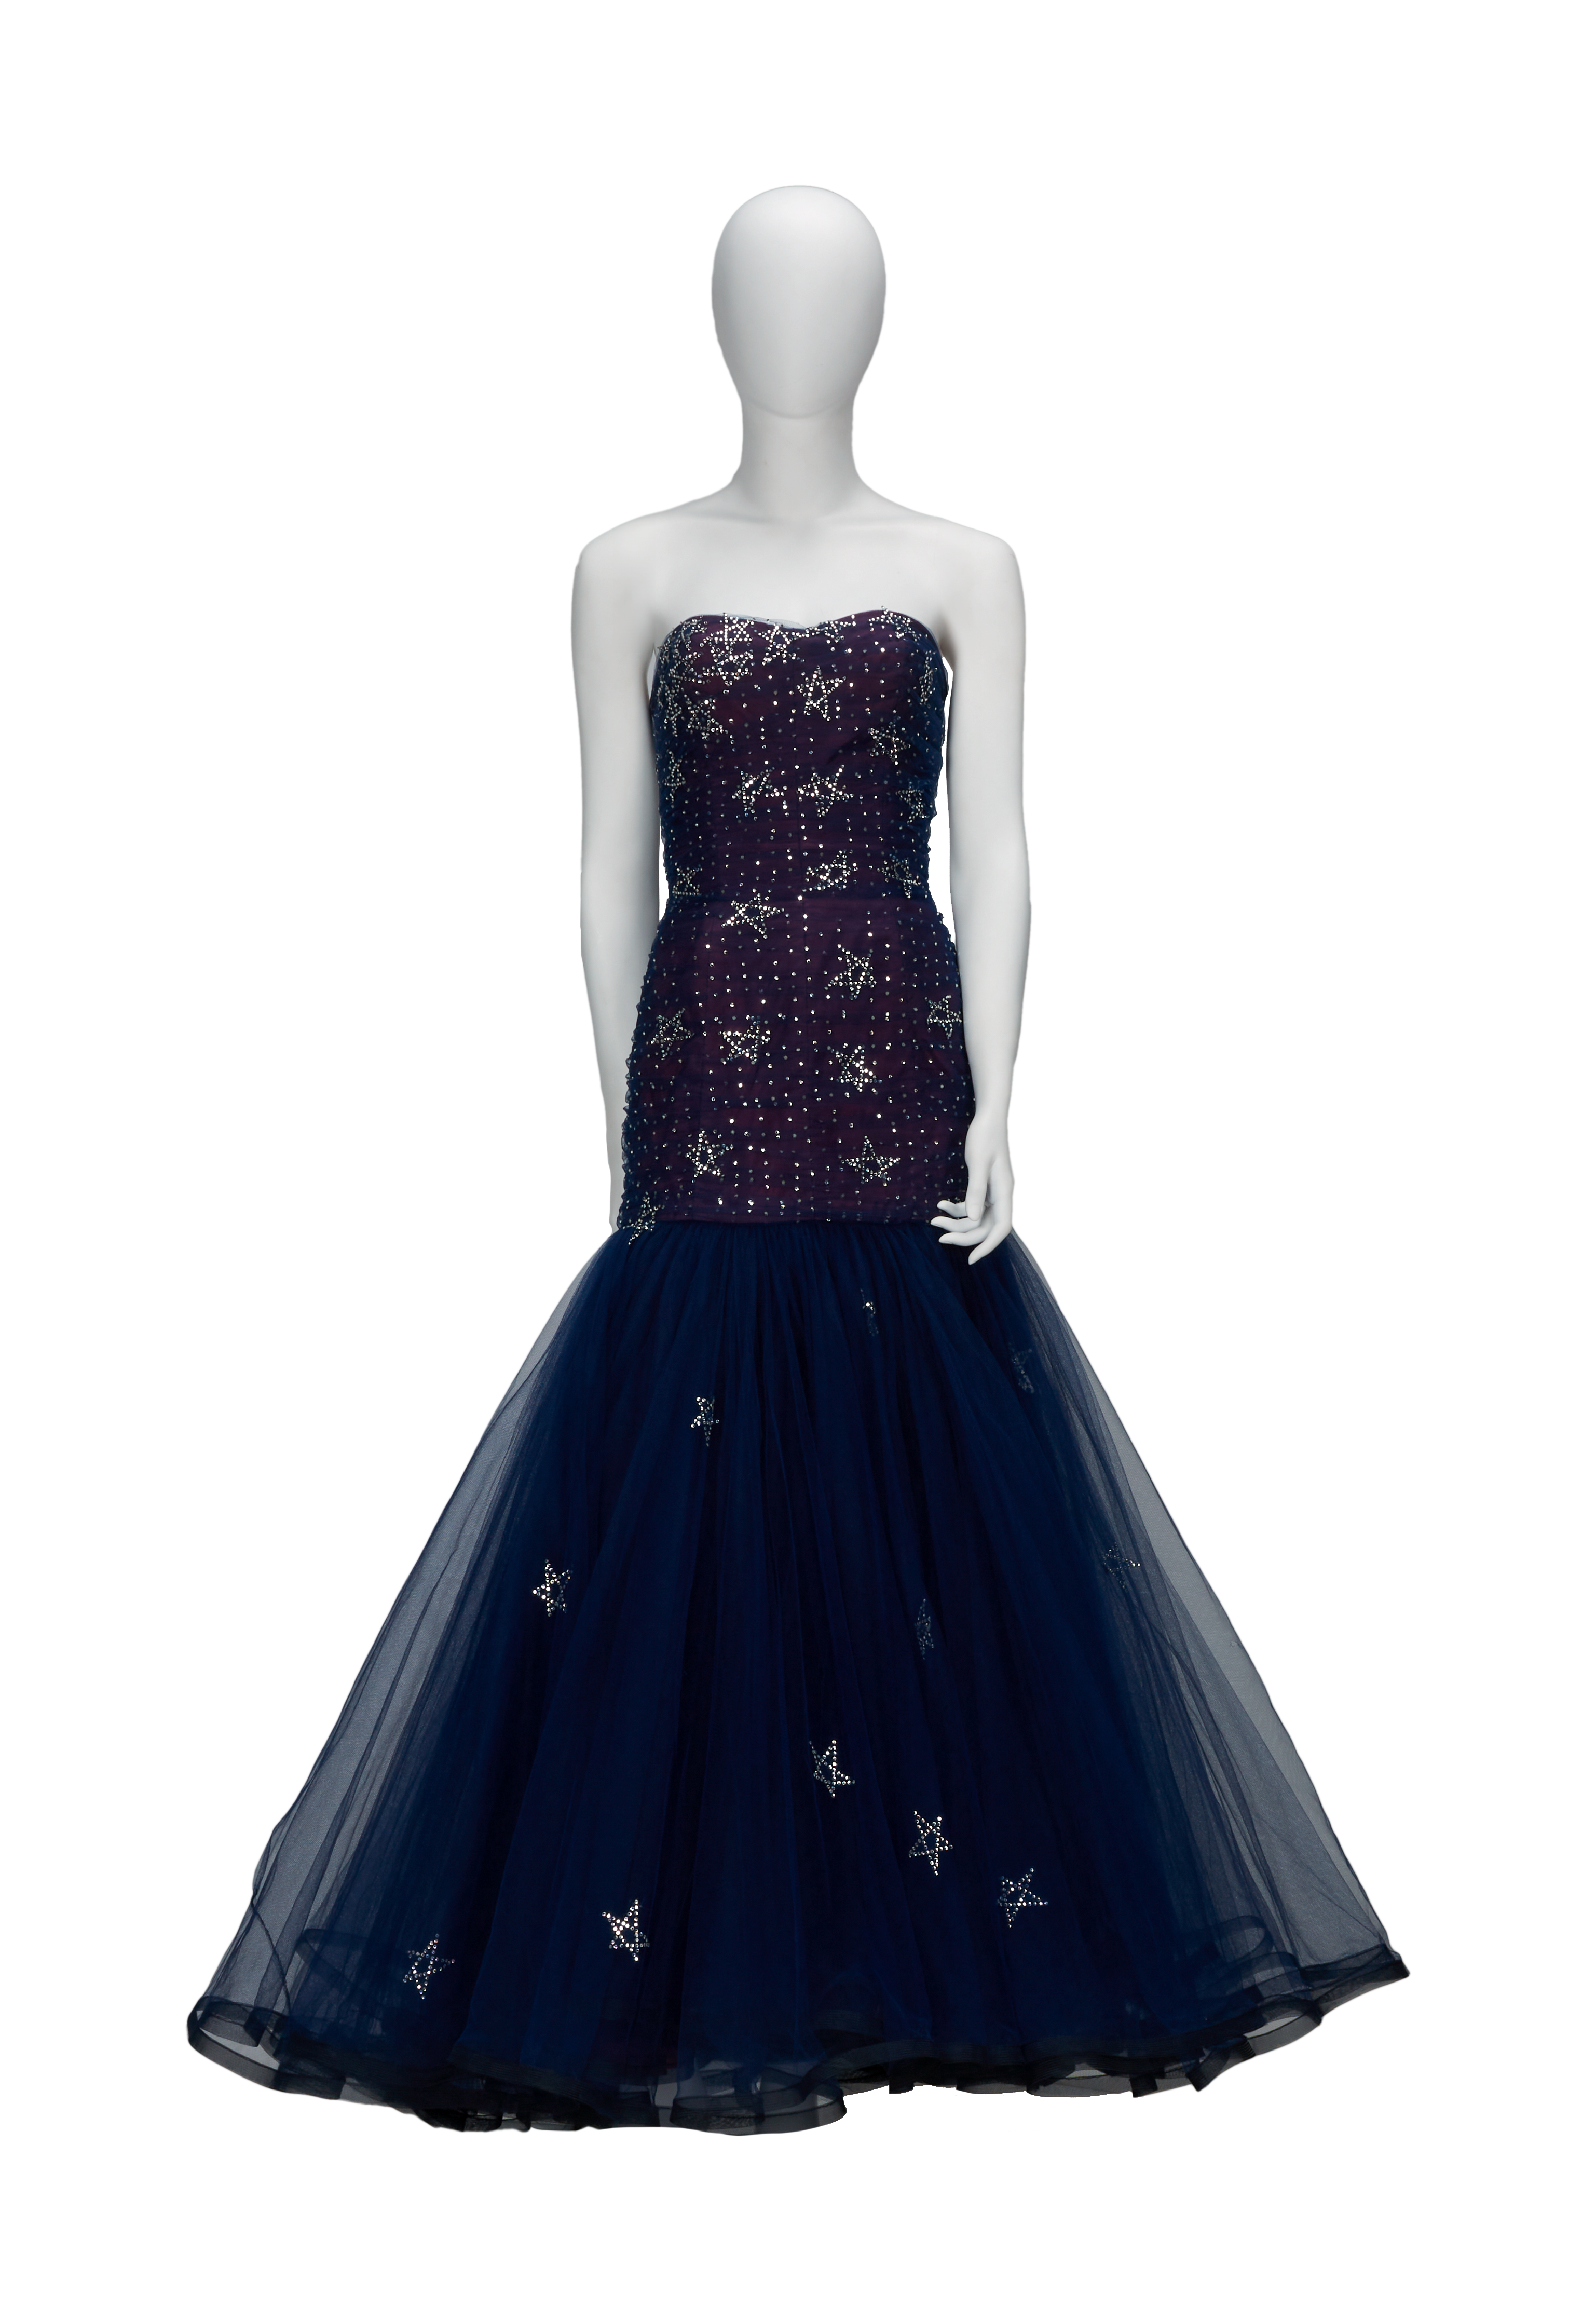 a mannequin is wearing a blue dress with stars on it